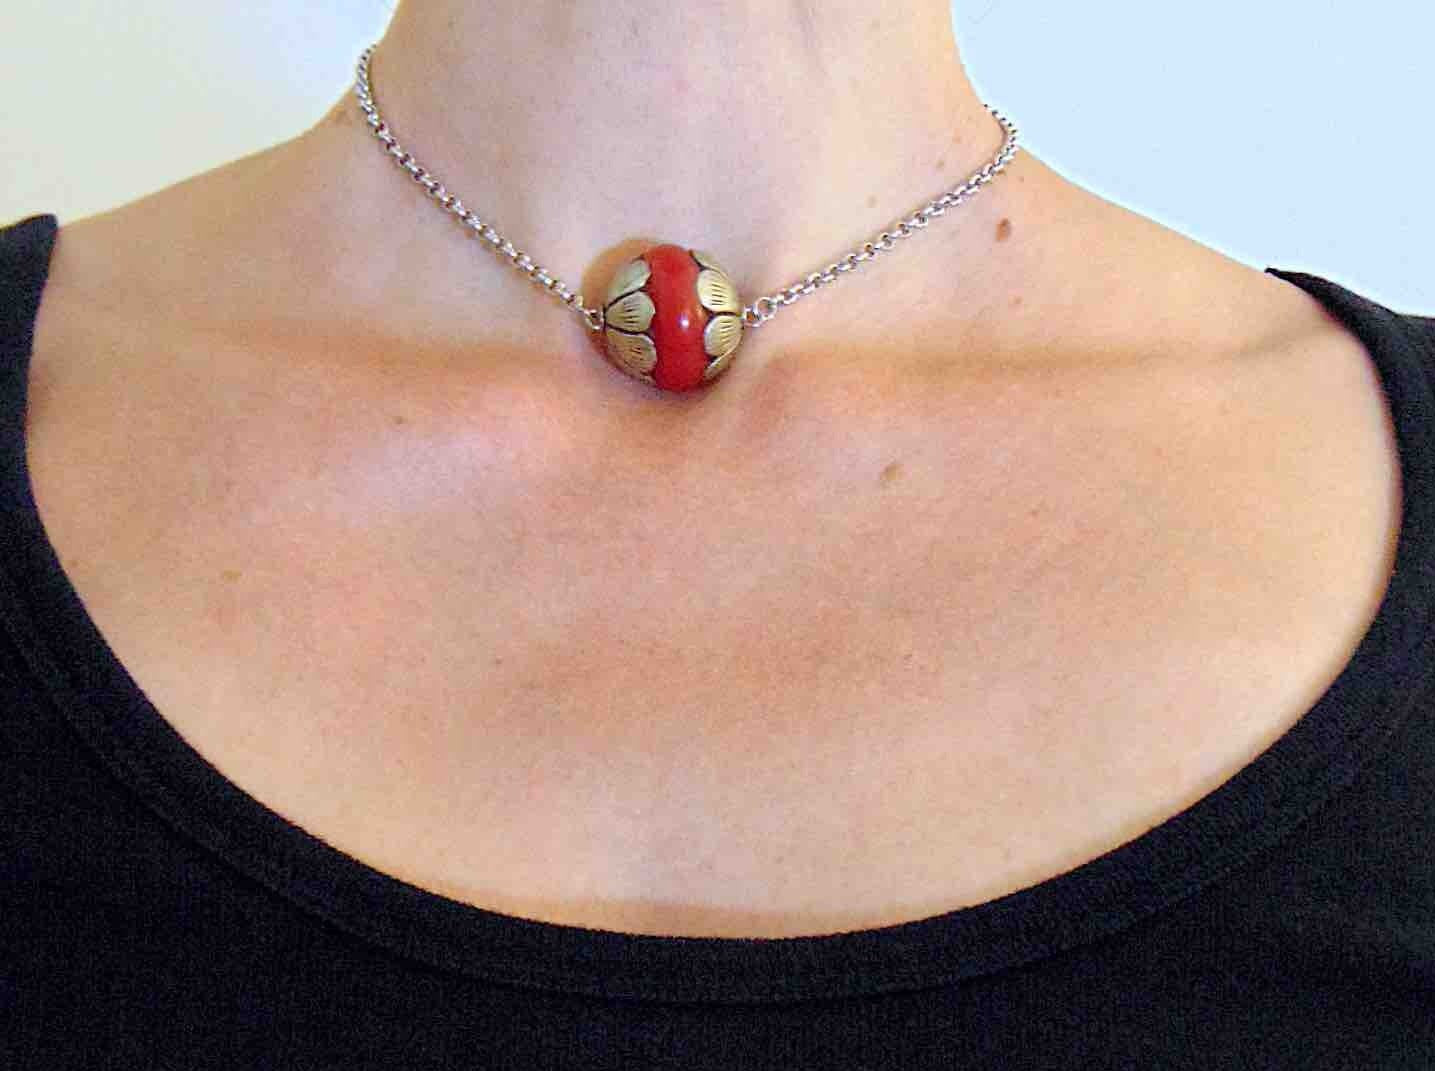 14-inch necklace with pewter and red resin Tibetan ball, stylized flower caps, stainless steel chain